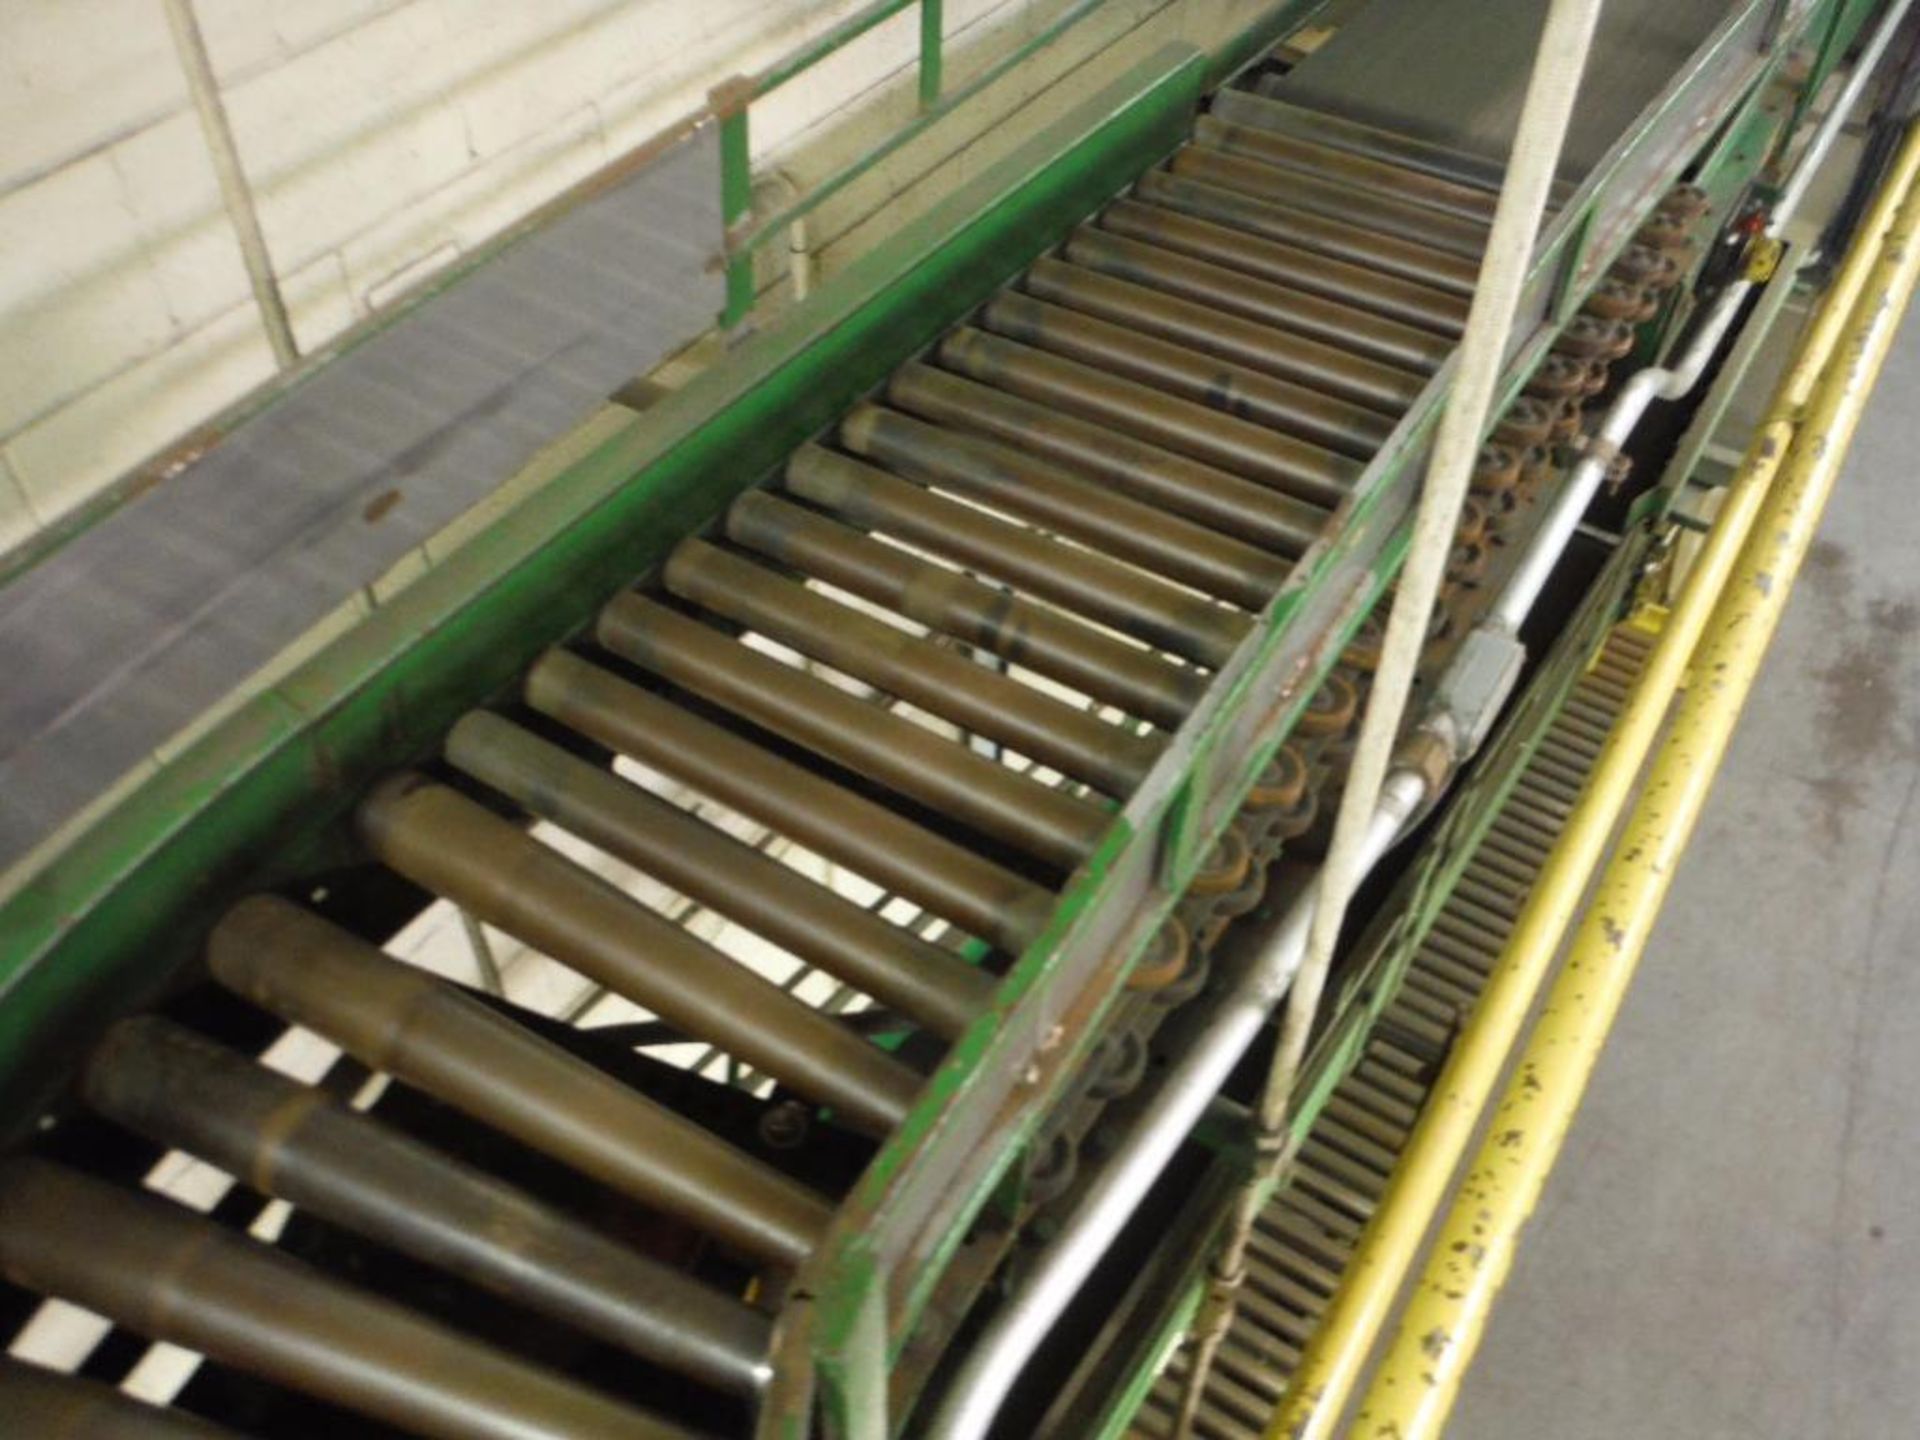 Uniflo 180 degree powered roller conveyor, overall 22 ft. long x 10 ft. wide, 18 in. wide rollers, - Image 7 of 7